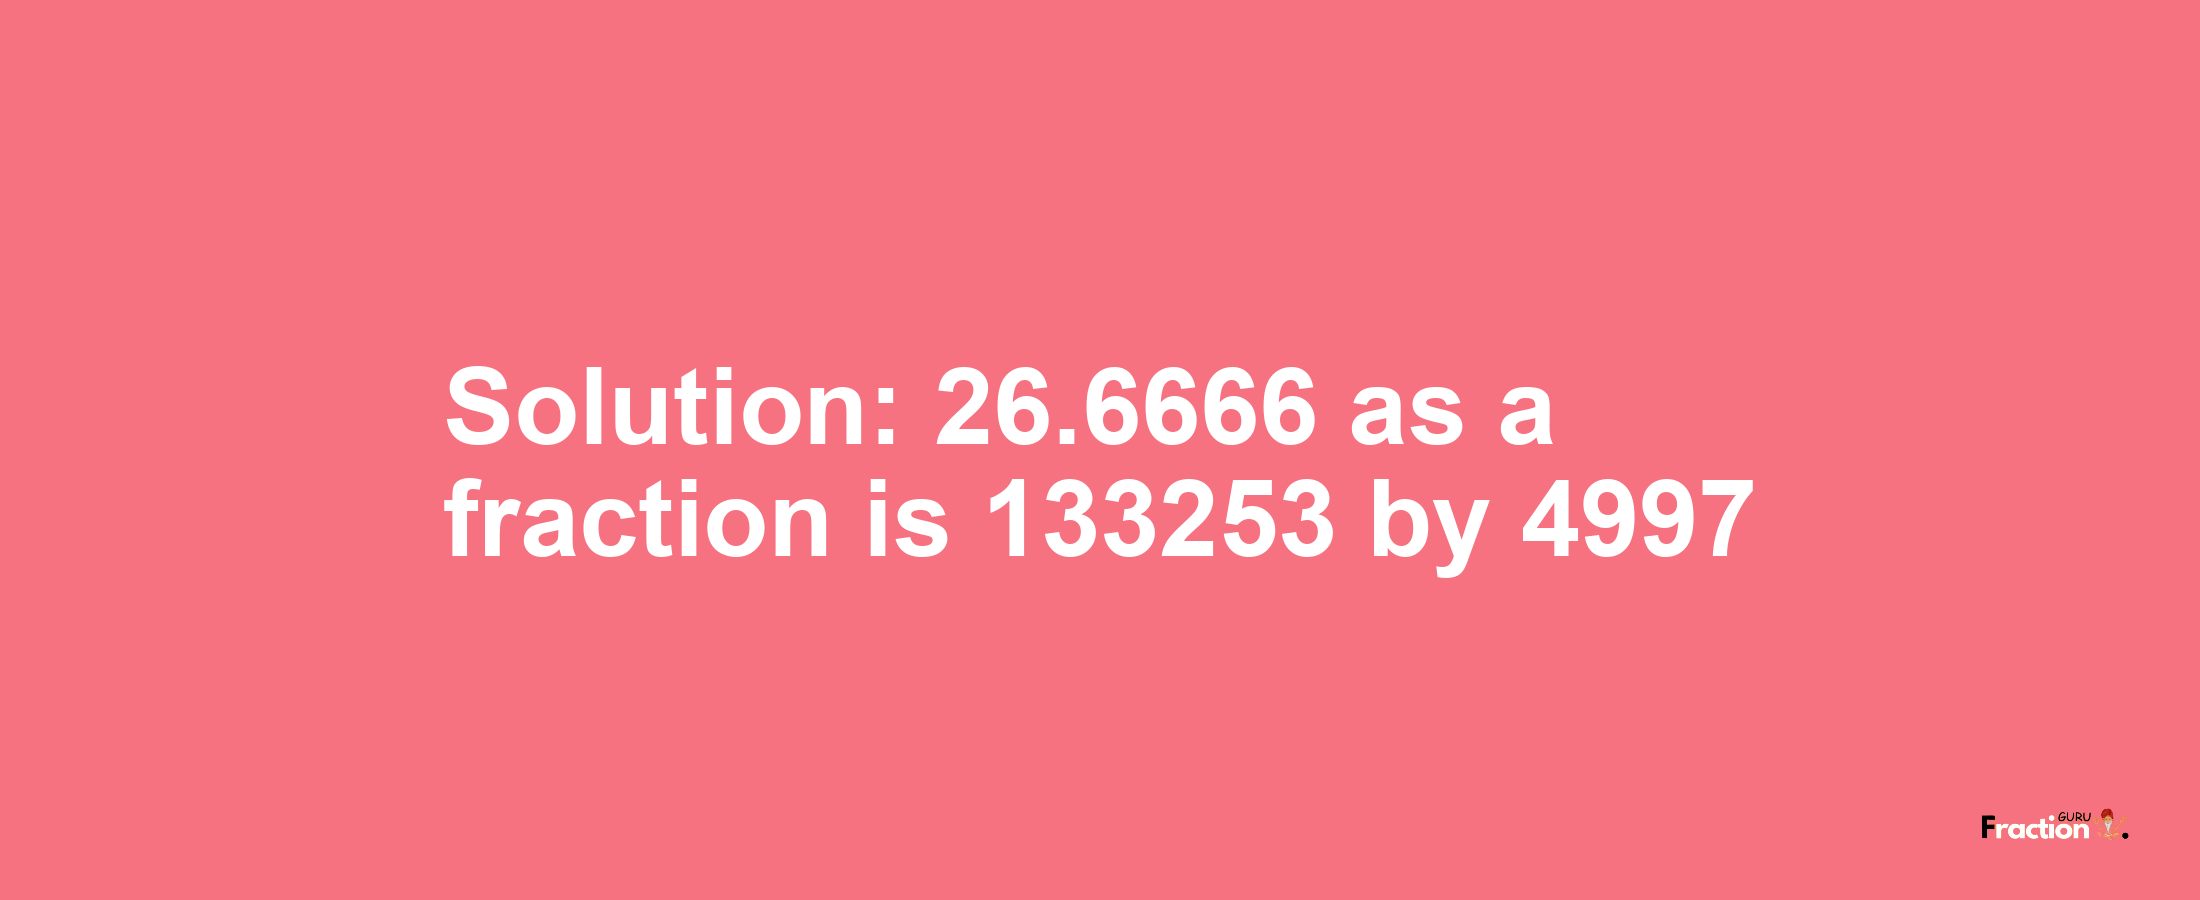 Solution:26.6666 as a fraction is 133253/4997